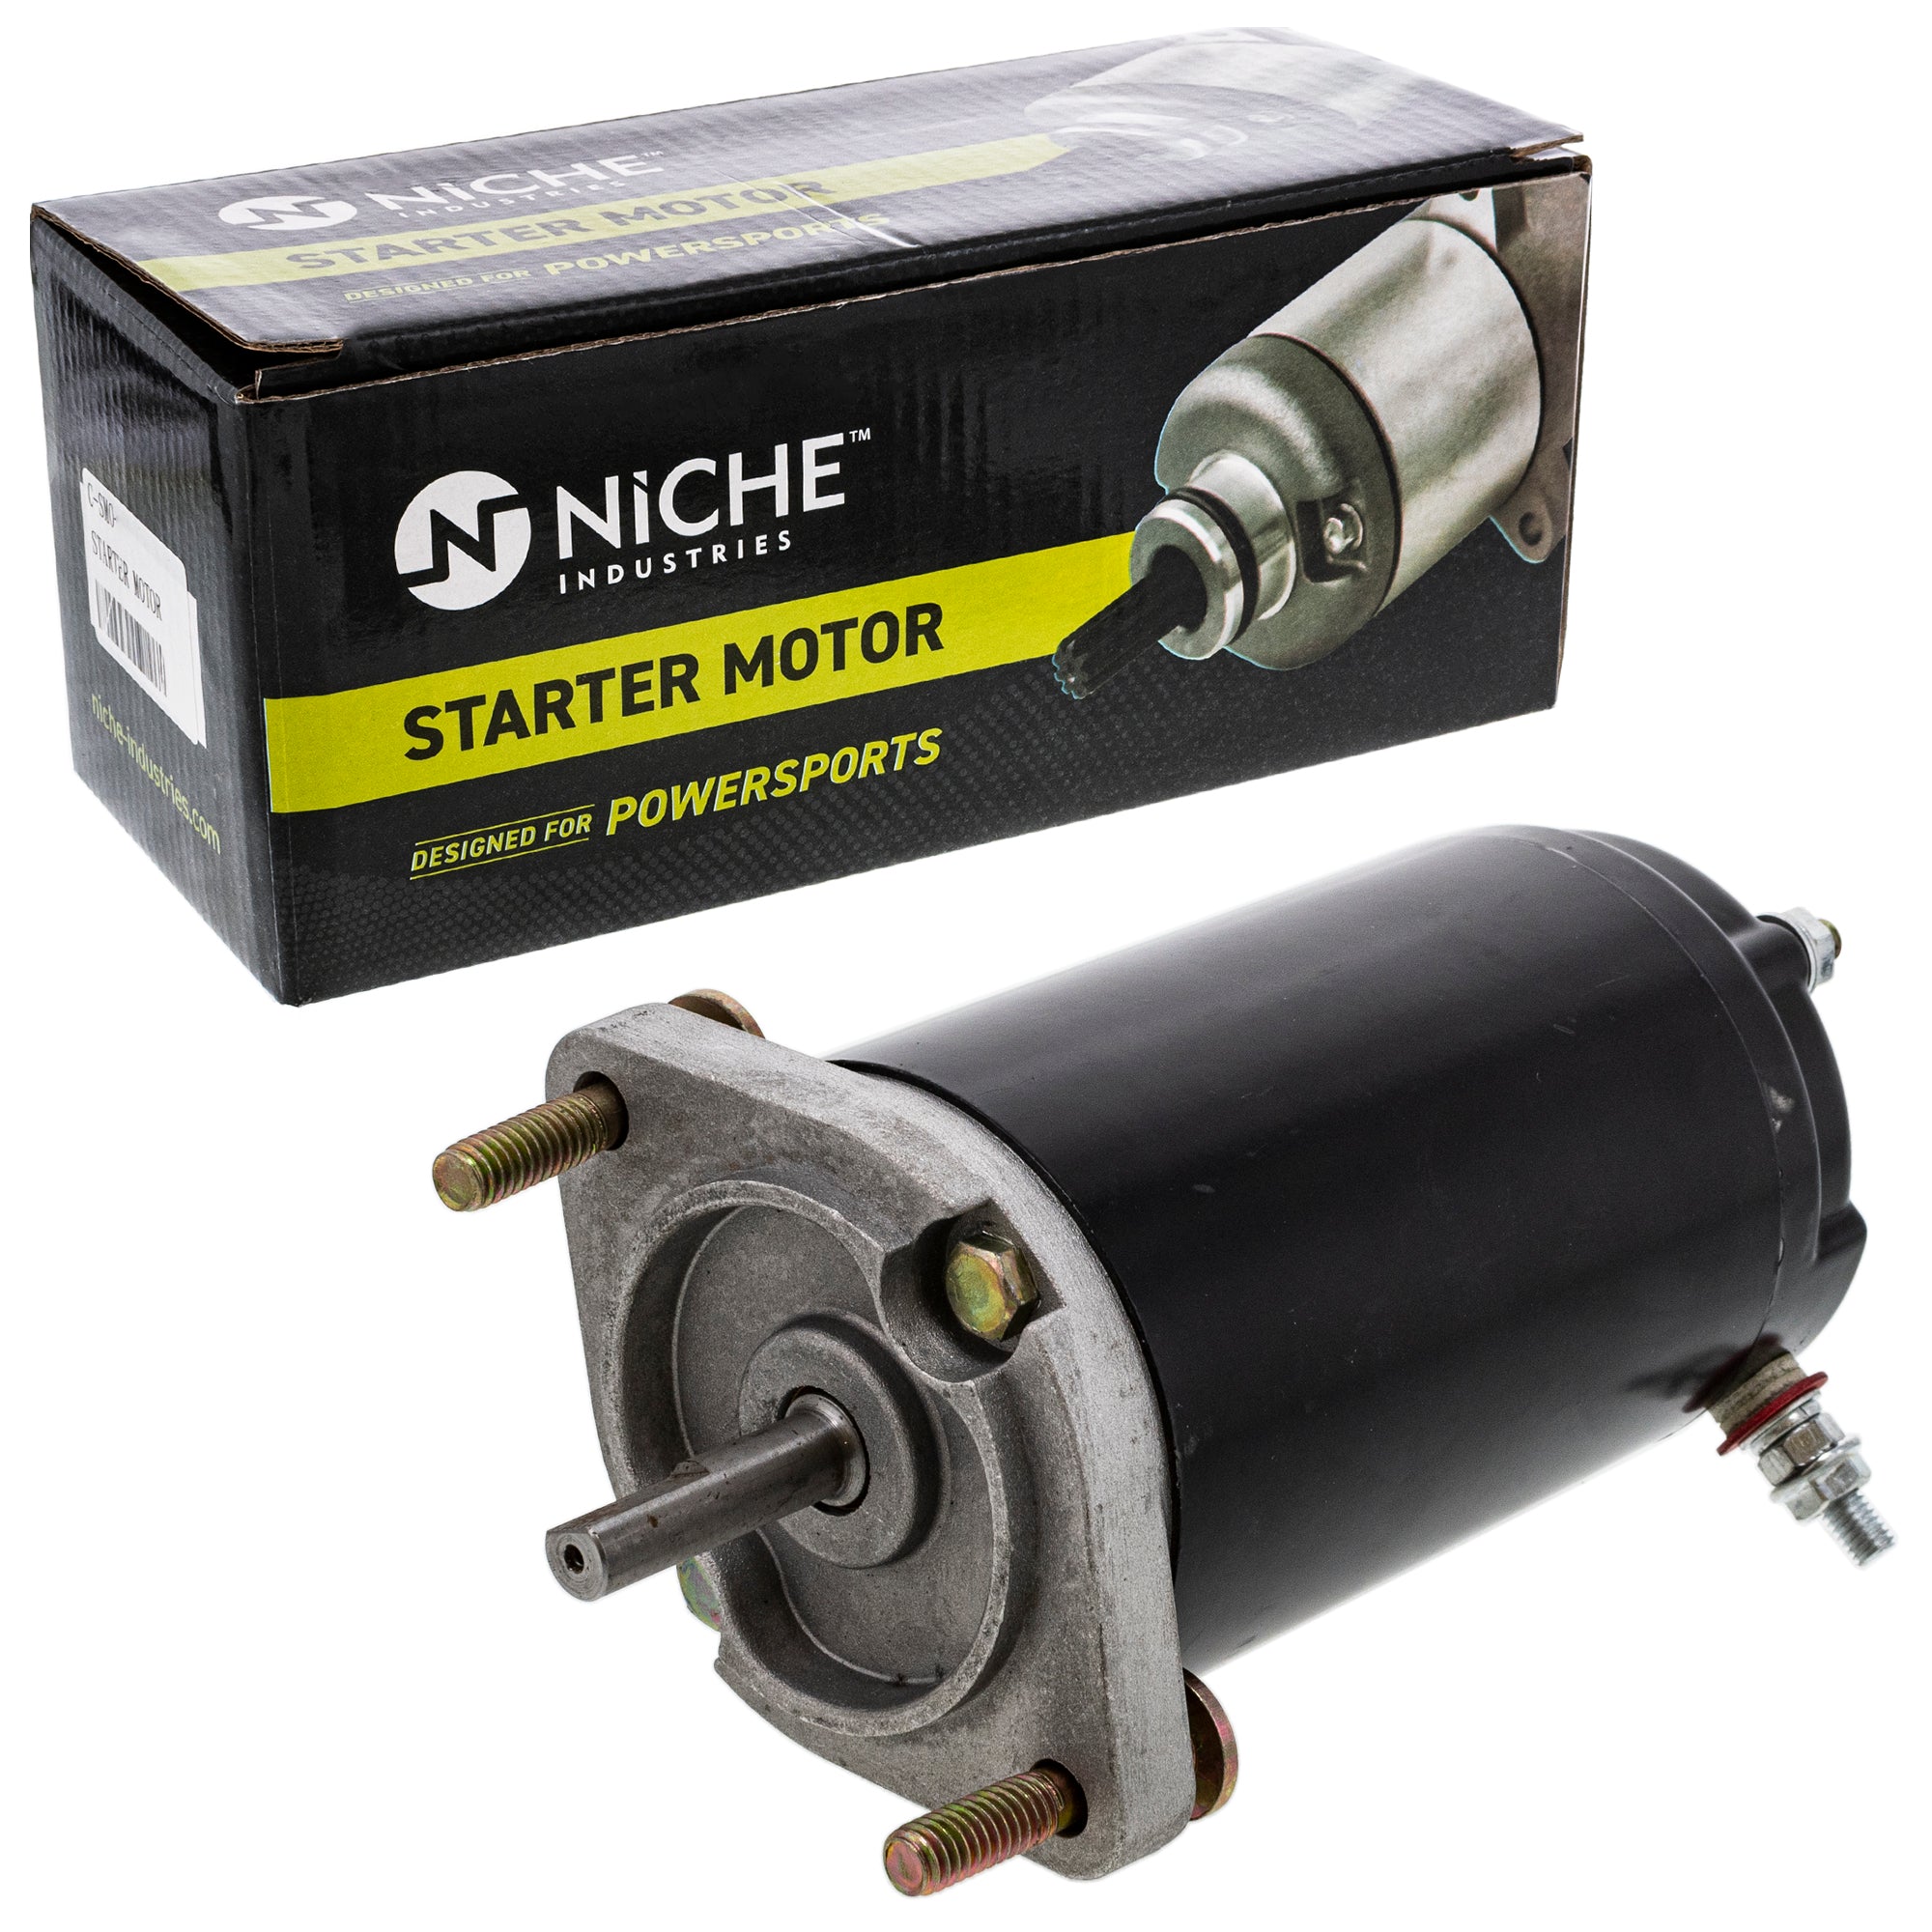 Starter Motor Assembly for Artco Arctic Cat Textron Cat 0745-356 0745-143 0745-350 NICHE 519-CSM2325O